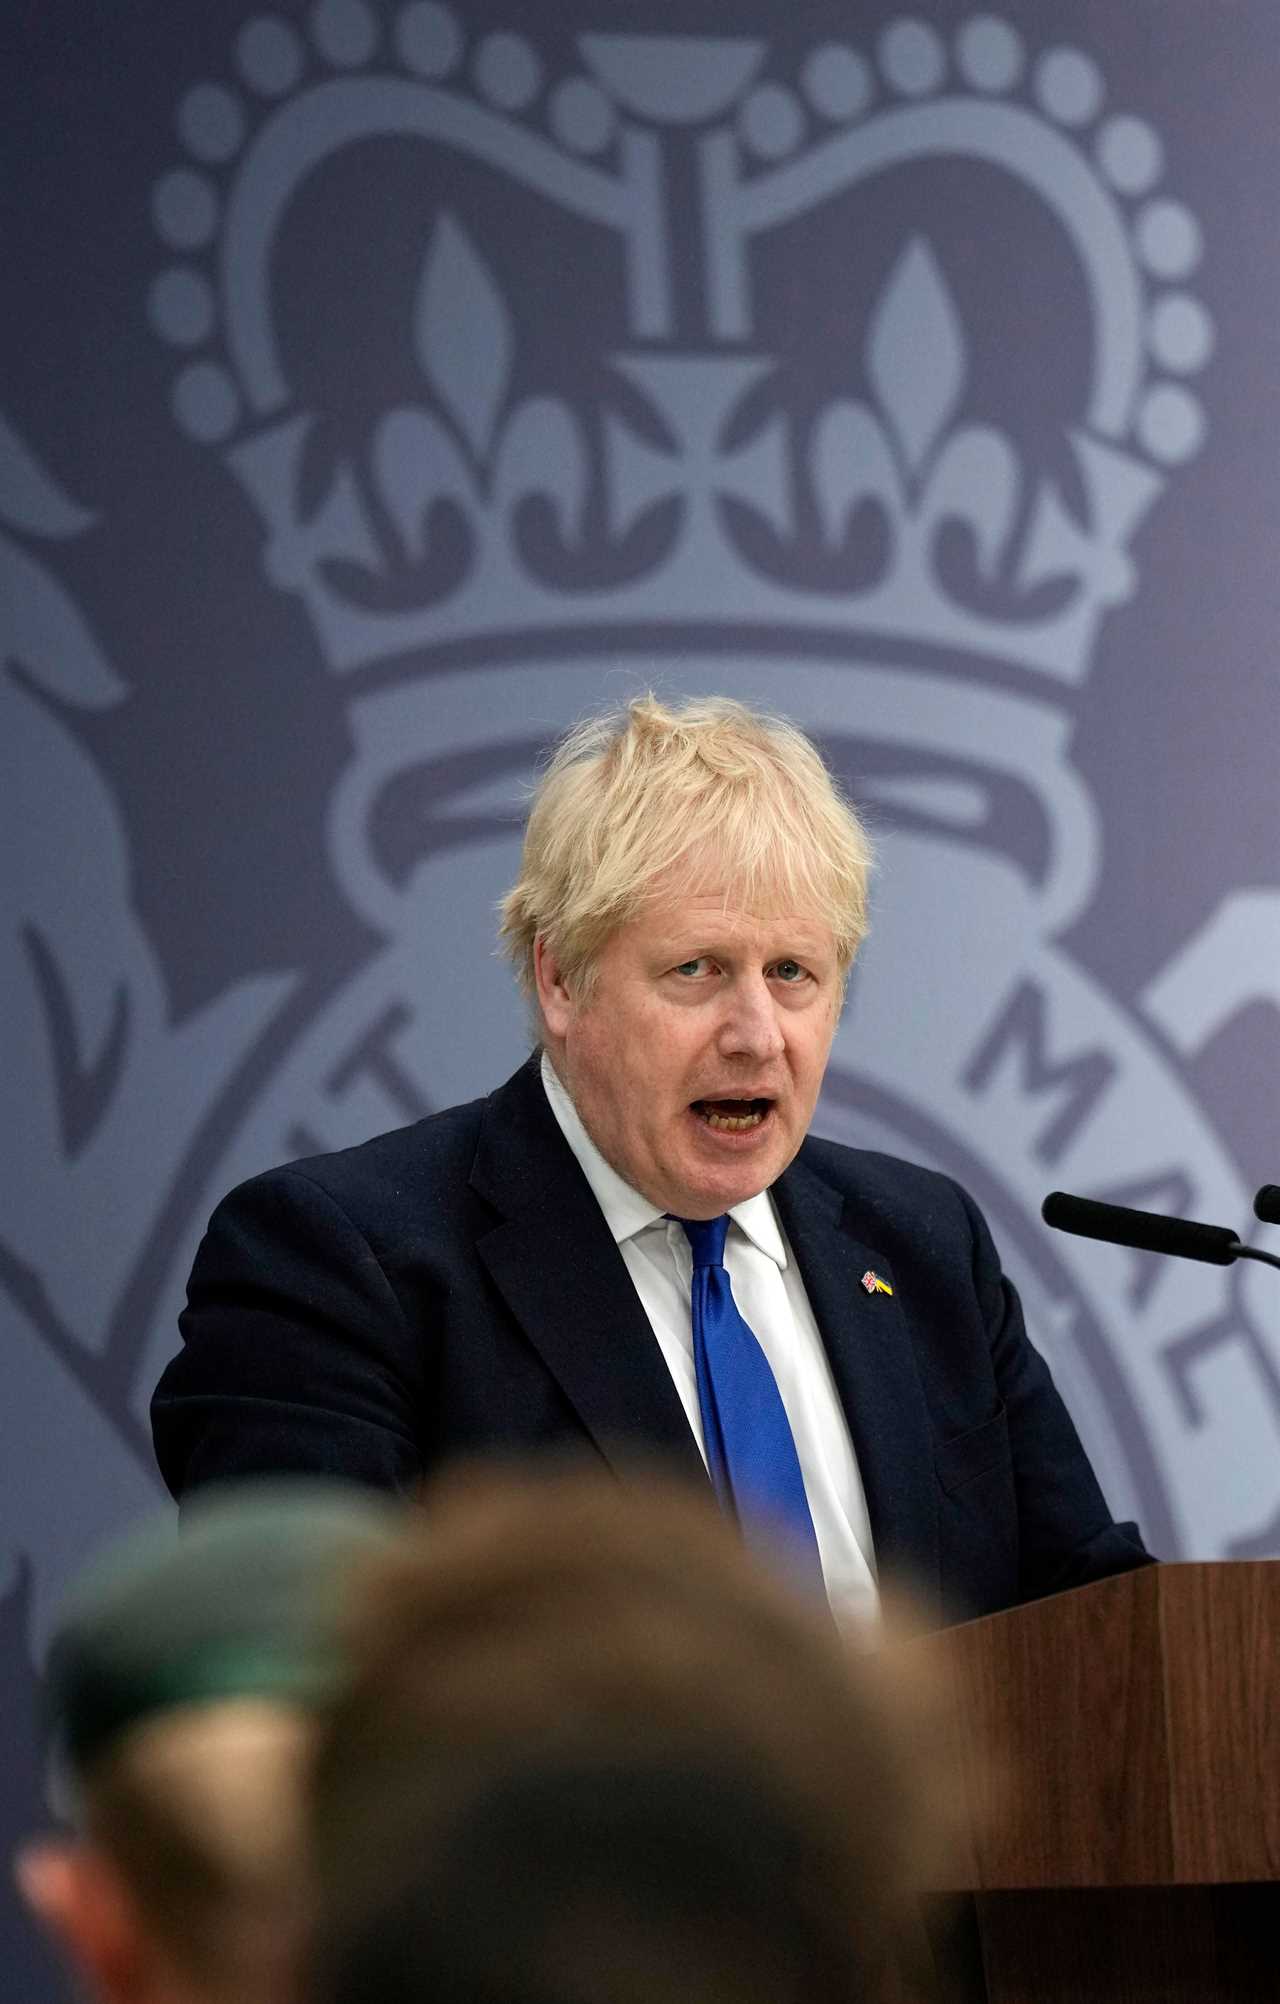 Boris Johnson targeted by cyber soldiers as part of Kremlin’s disinformation campaign